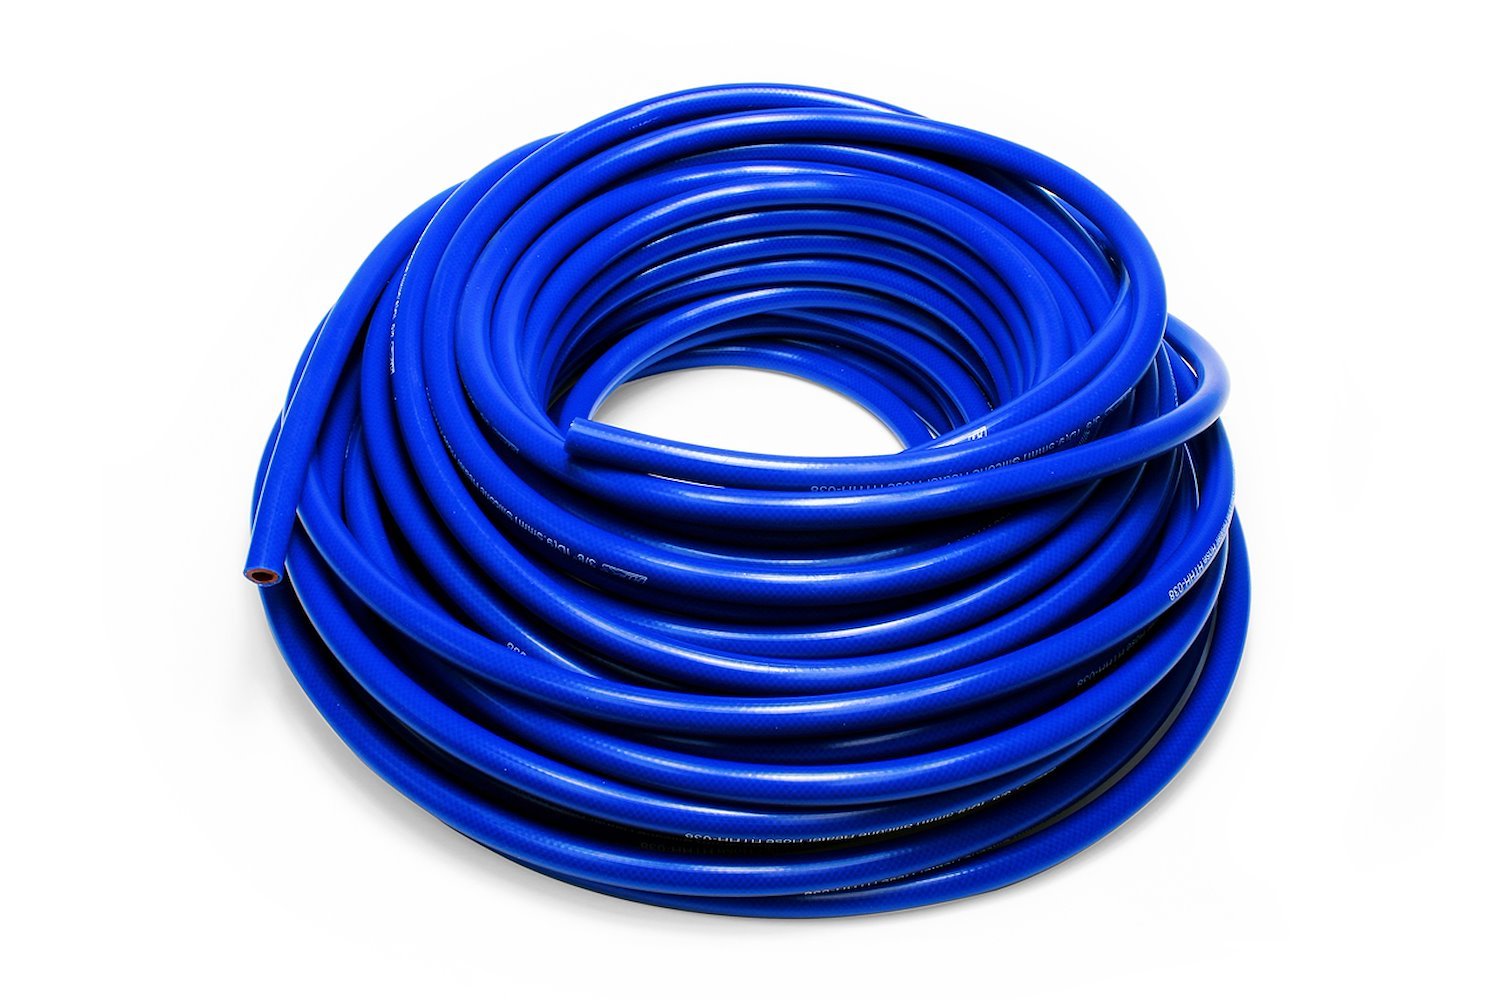 HTHH-038-BLUEx100 Silicone Heater Hose Tubing, High-Temp Reinforced, 3/8 in. ID, 100 ft. Roll, Blue